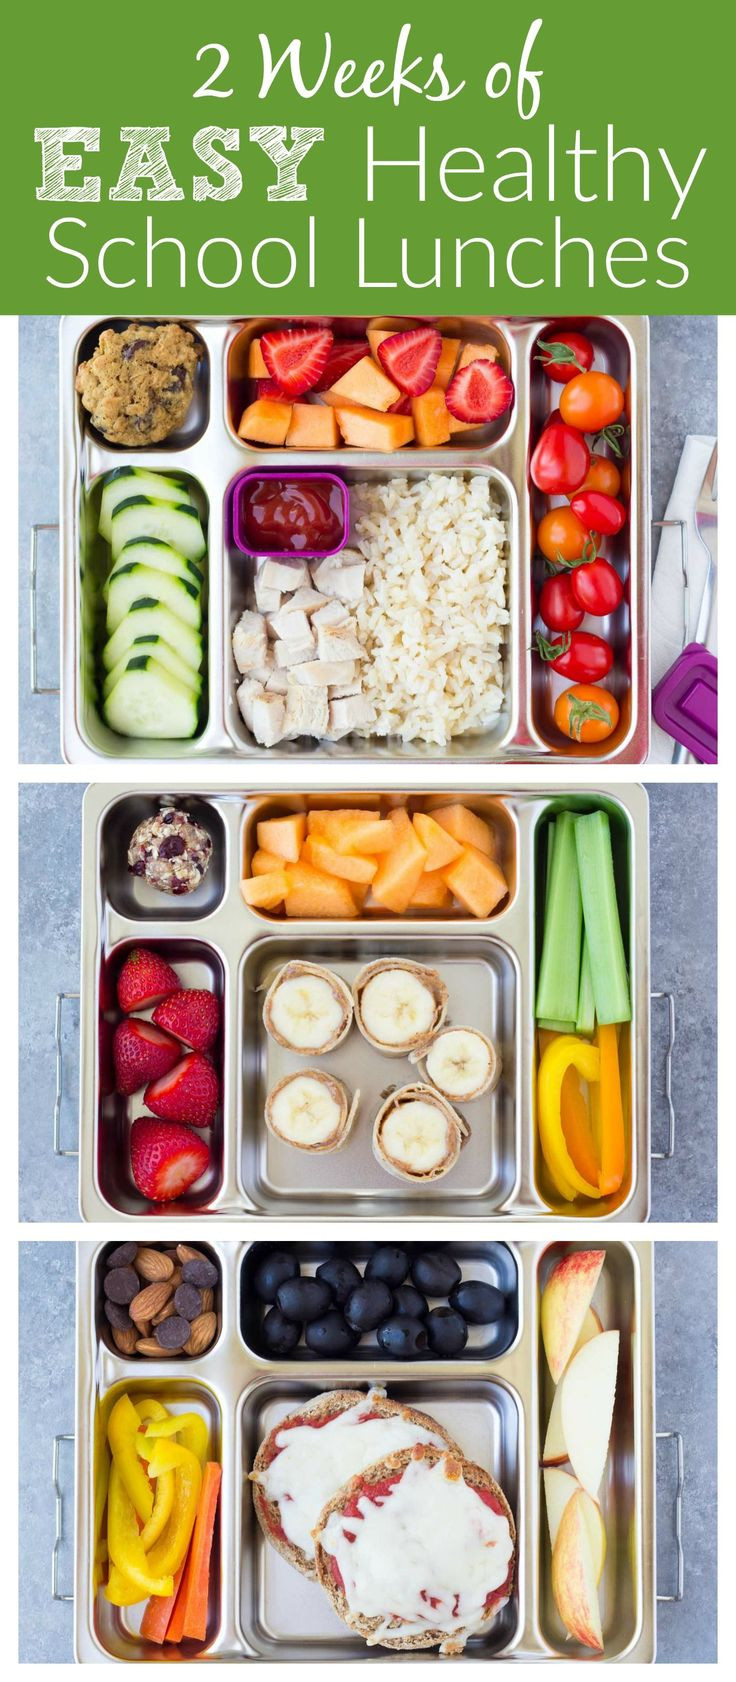 Healthy Kid Lunches
 17 Best images about ☺Cute Lunch Ideas☺ for kids on